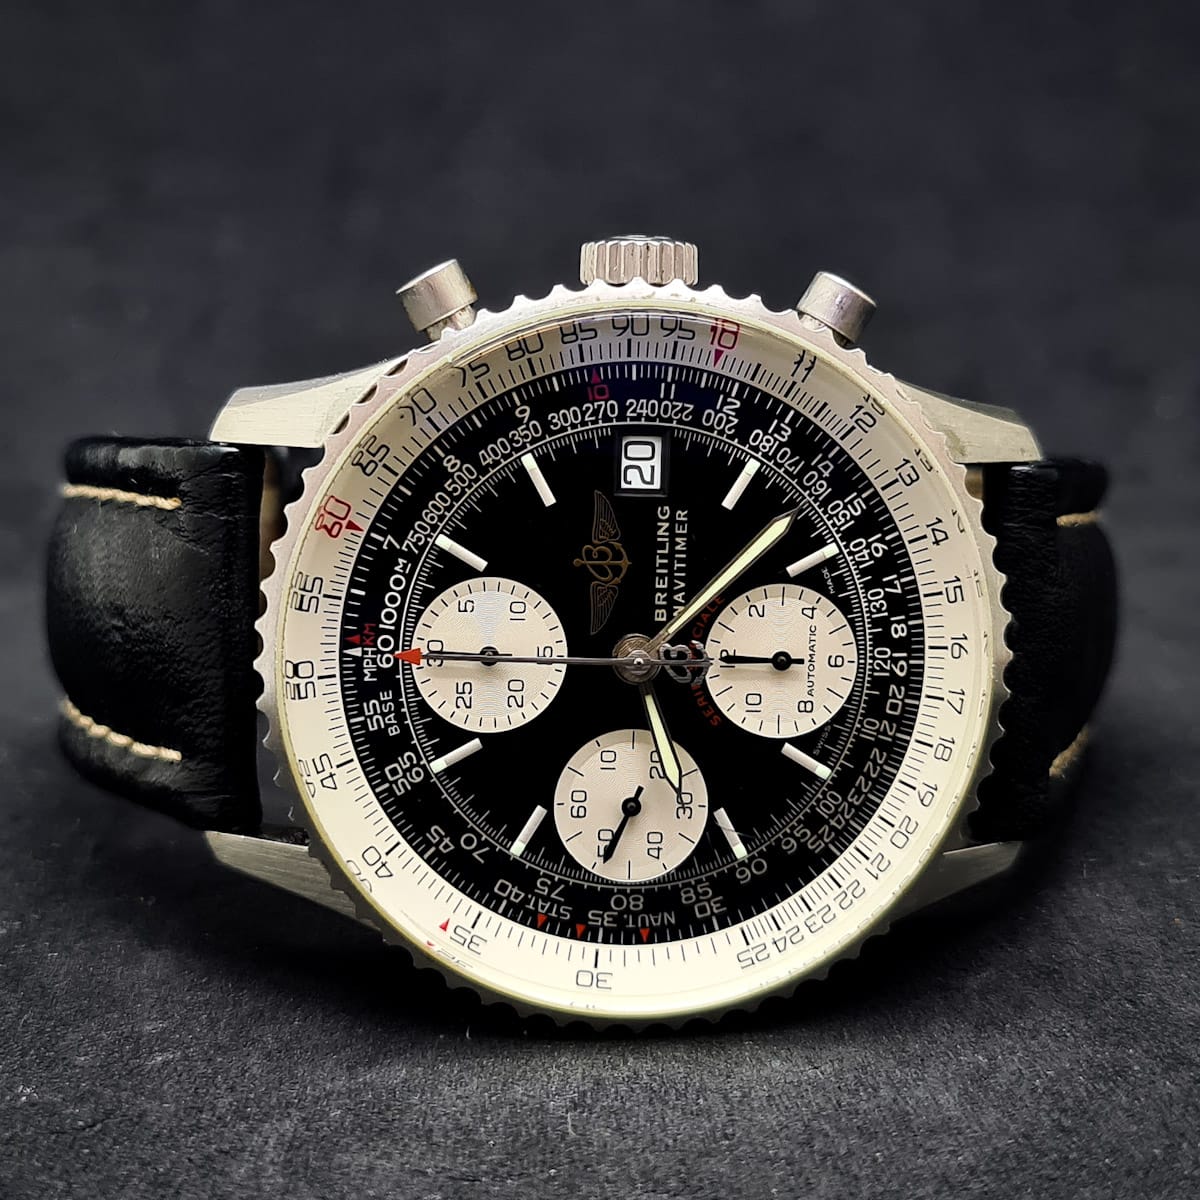 BREITLING NAVITIMER FIGHTERS SPECIAL EDITION